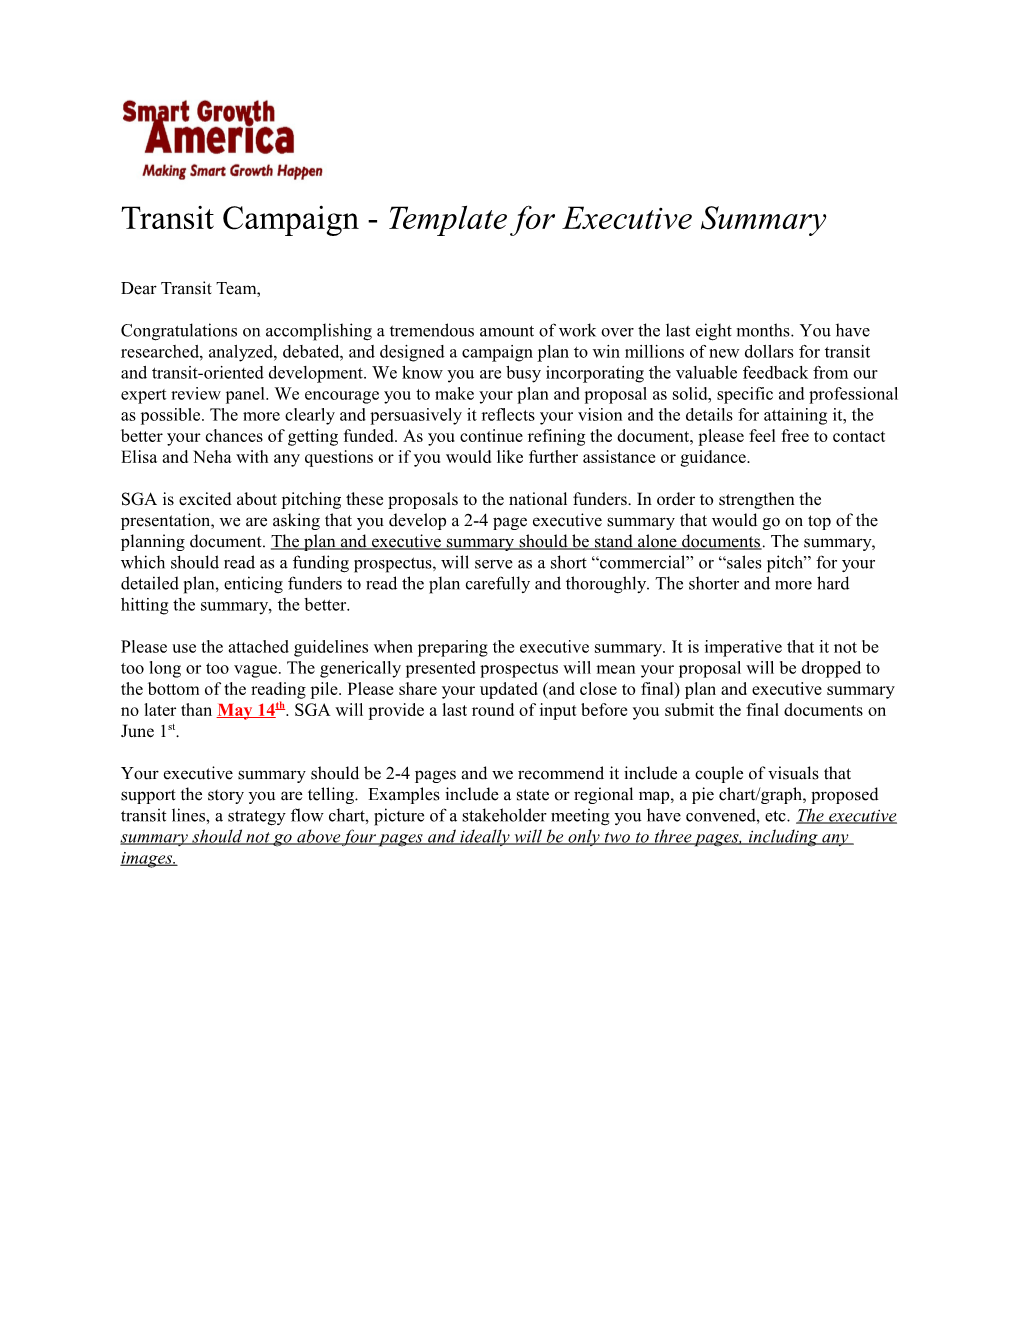 Transit Campaign - Template for Executive Summary